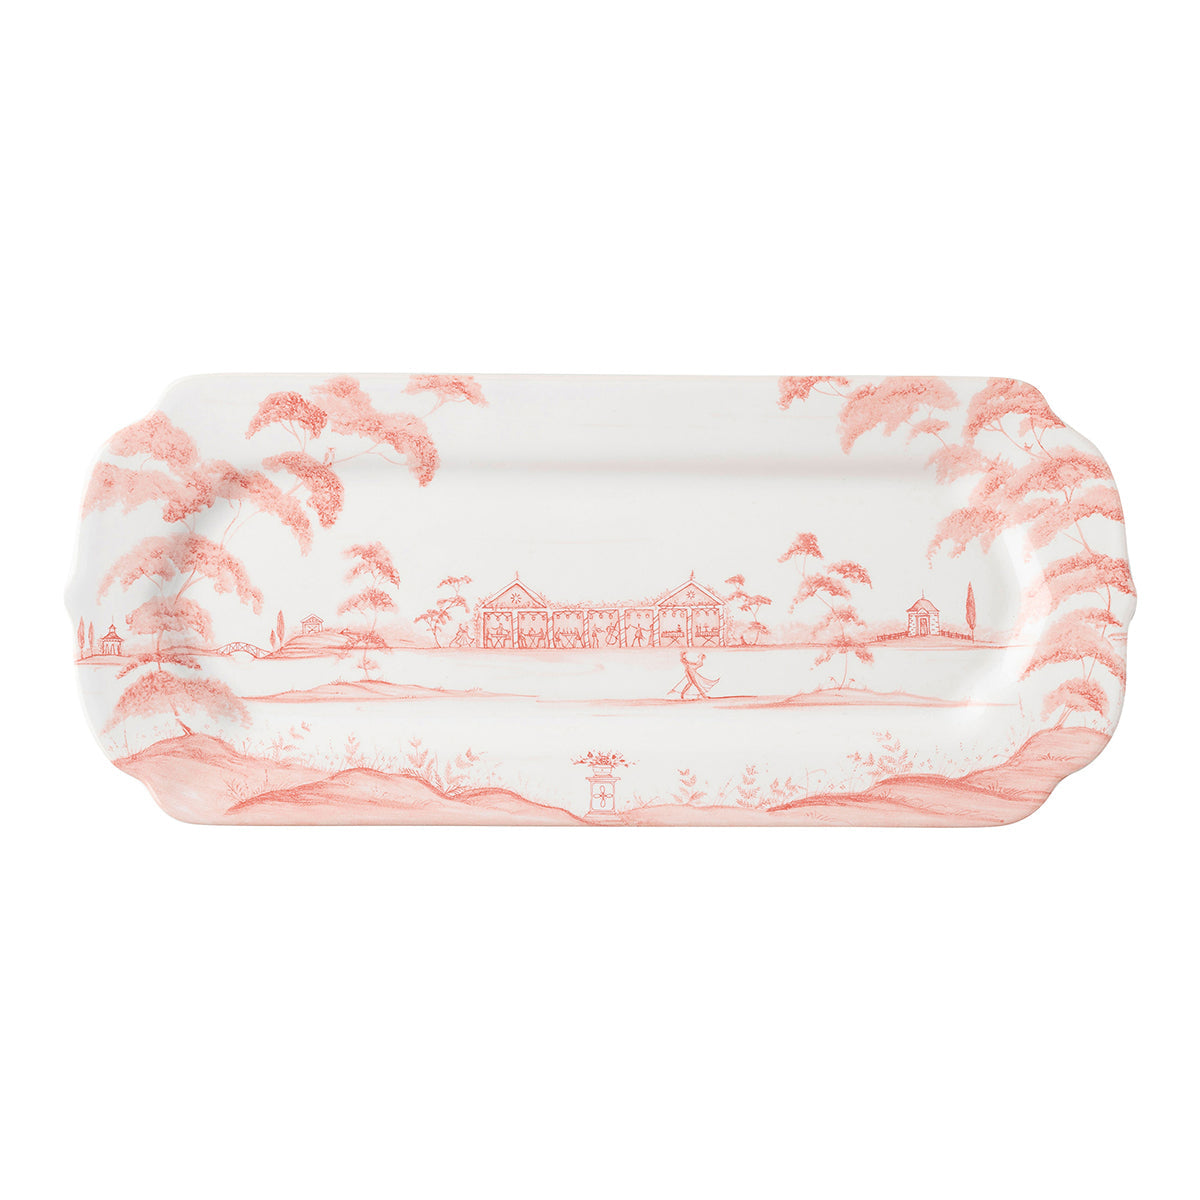 Country Estate Hostess Tray - Petal Pink-2nd